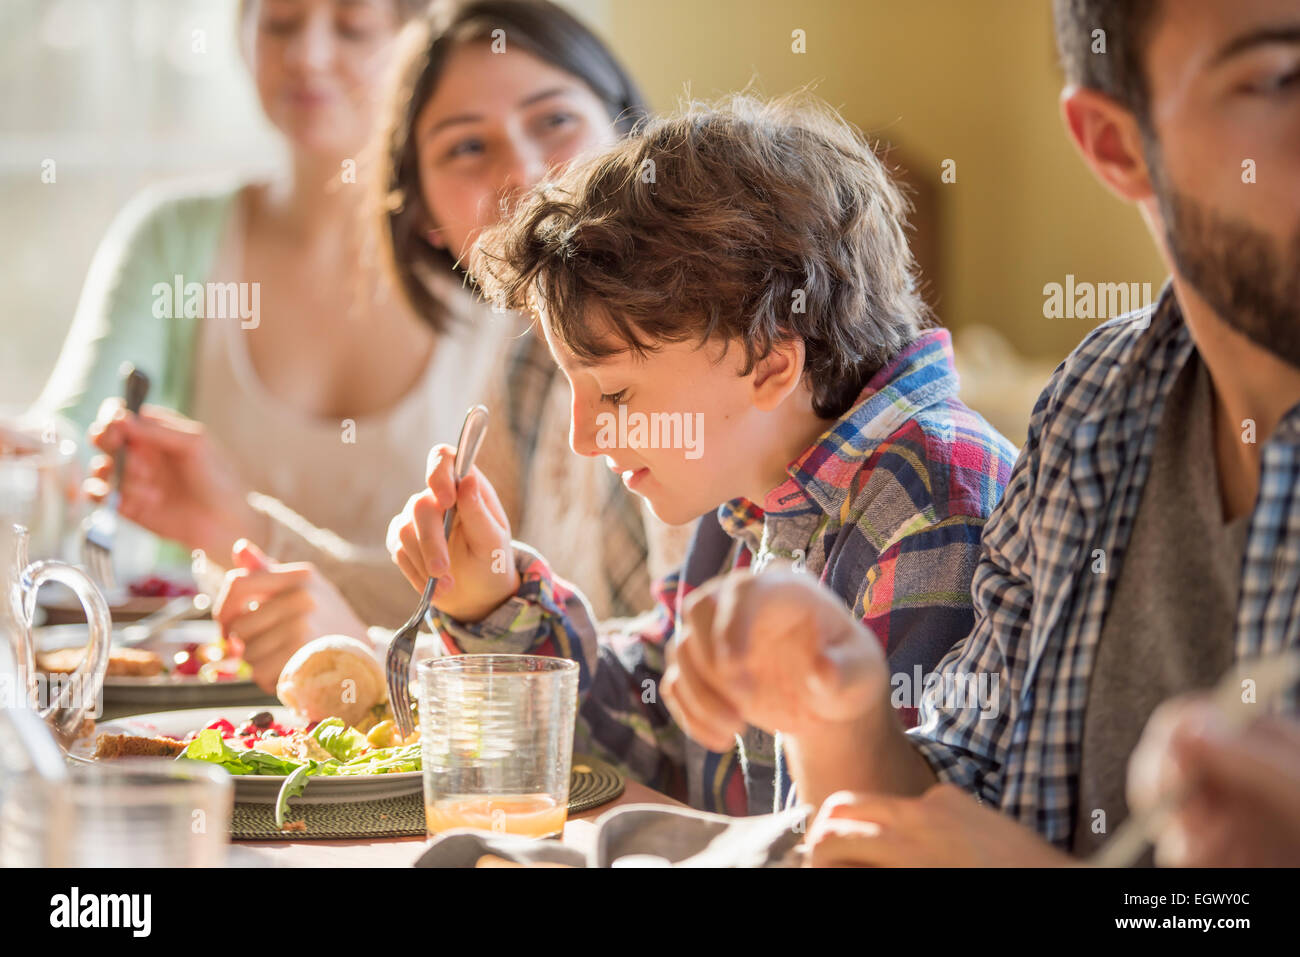 A group of people, adults and children, seated around a table for a meal. Stock Photo